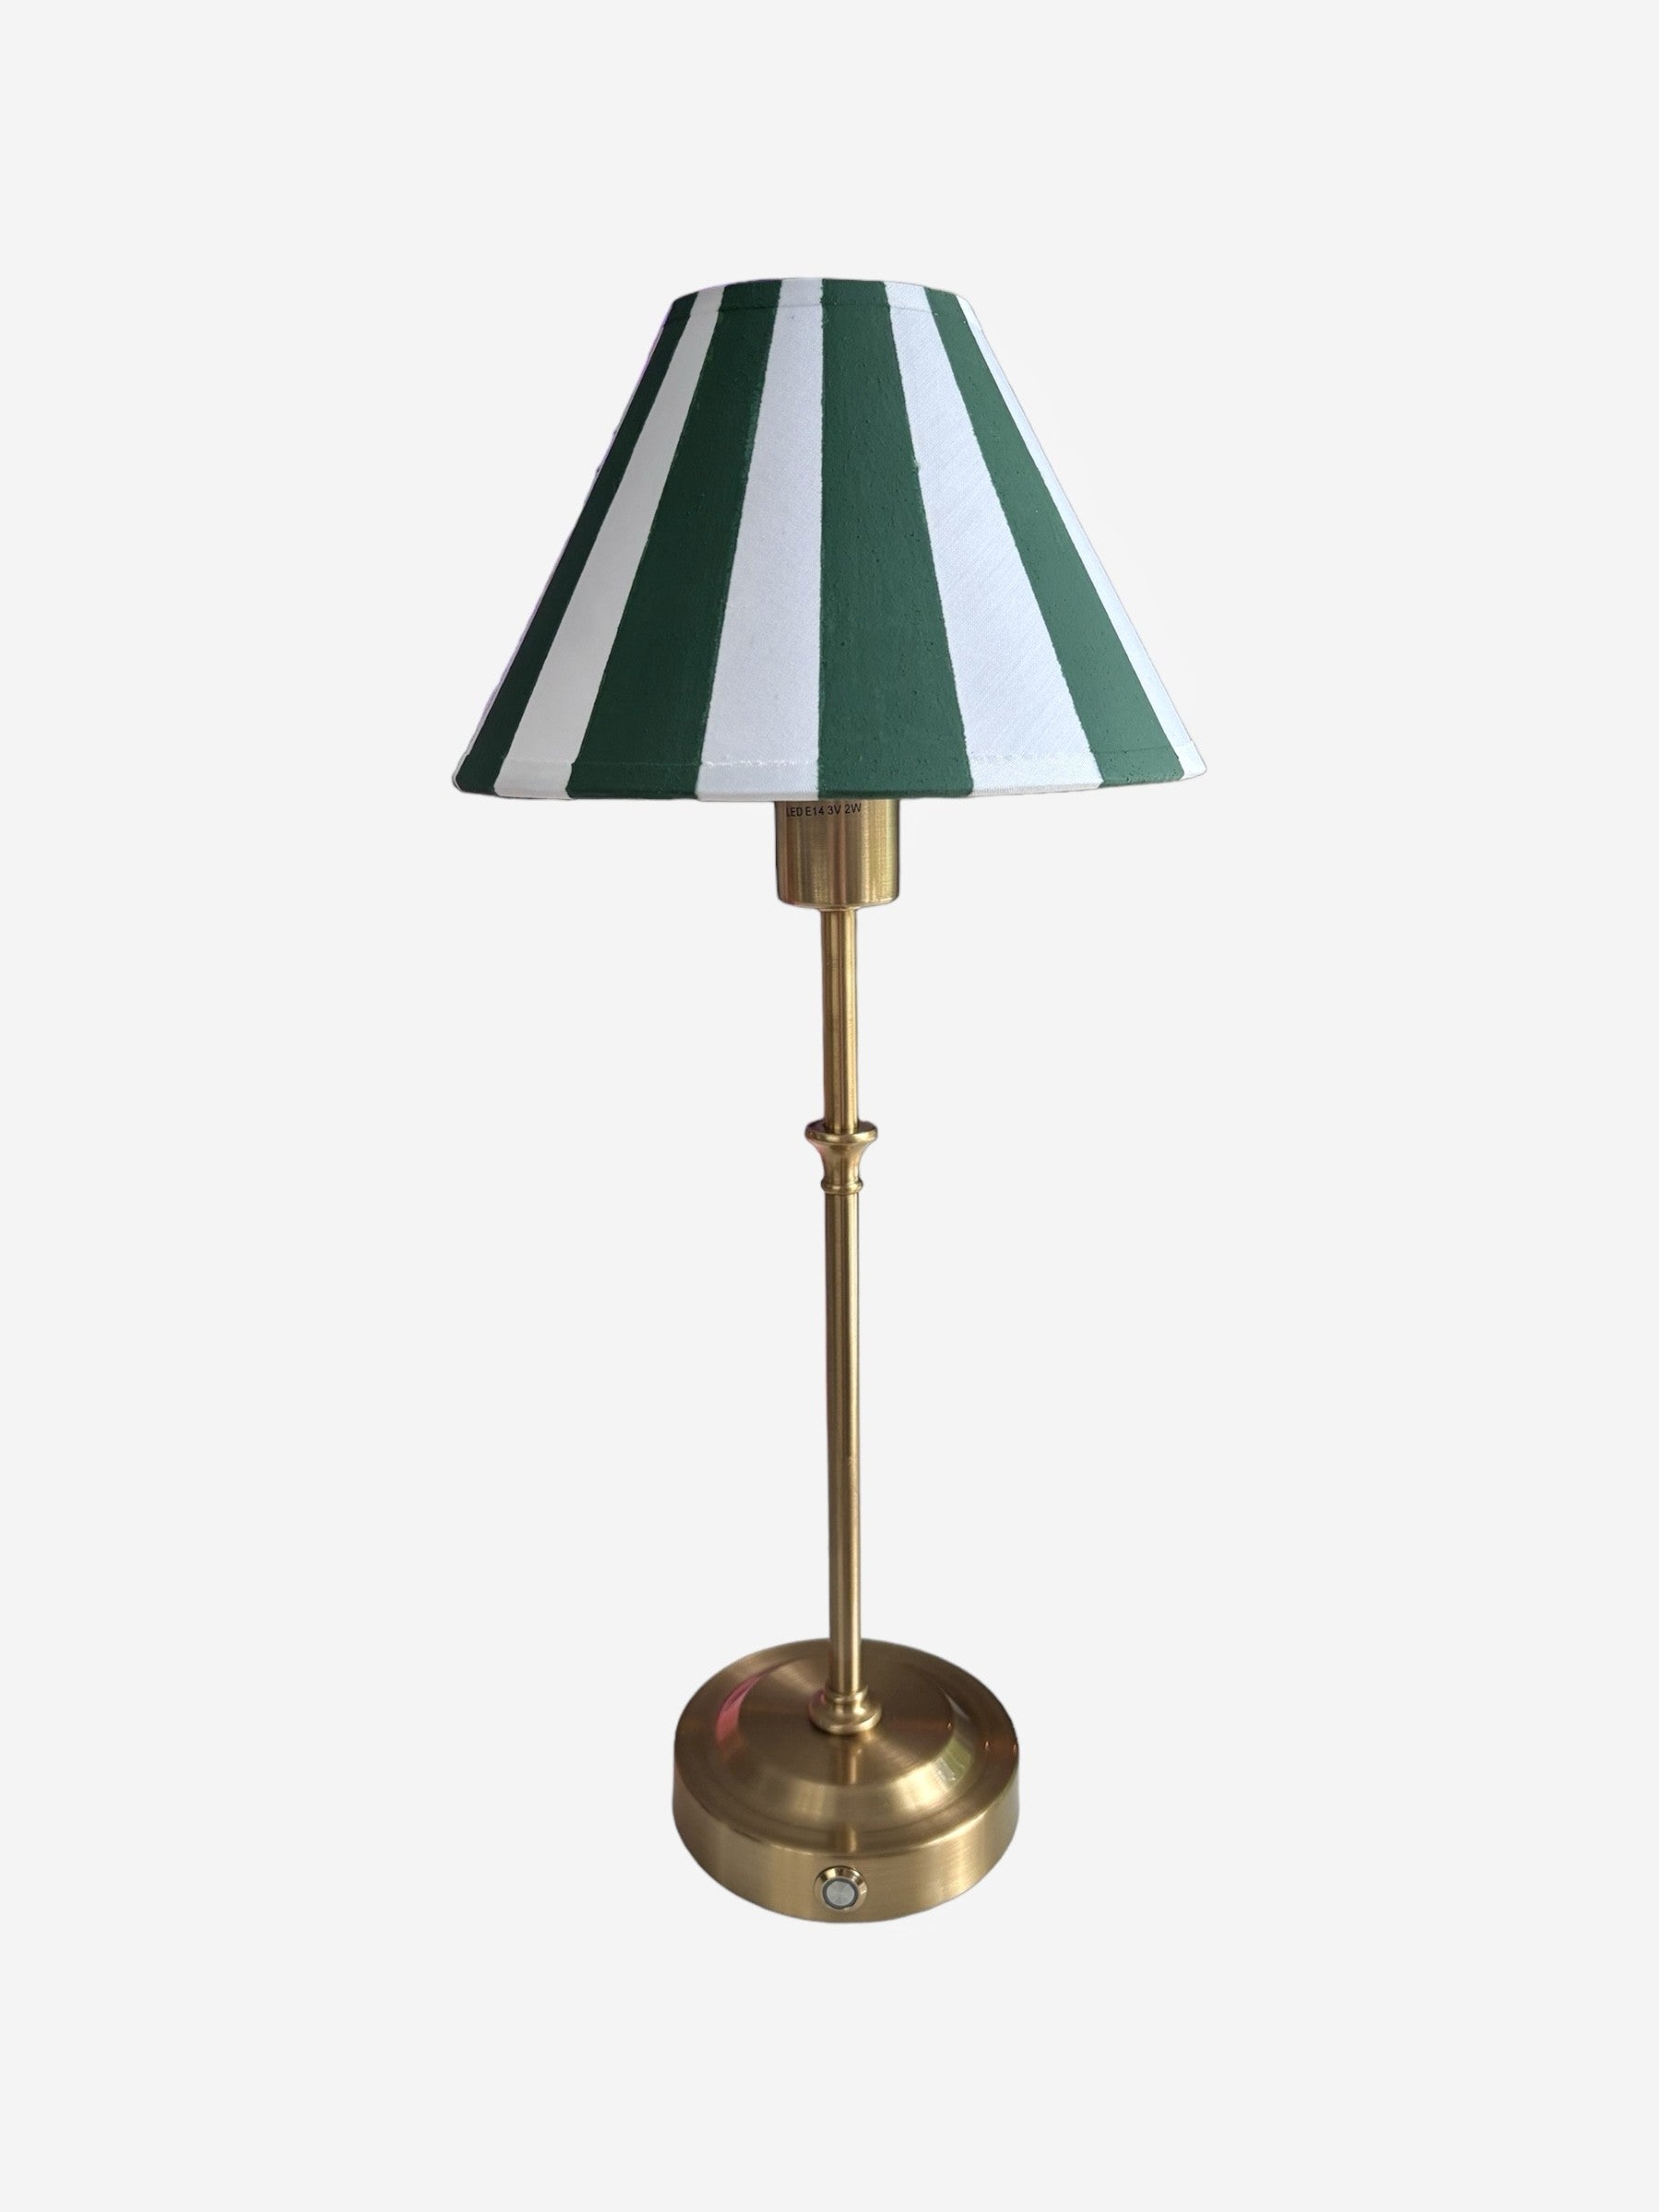 A rechargeable, cordless brass lamp with a hand painted green and white striped lampshade